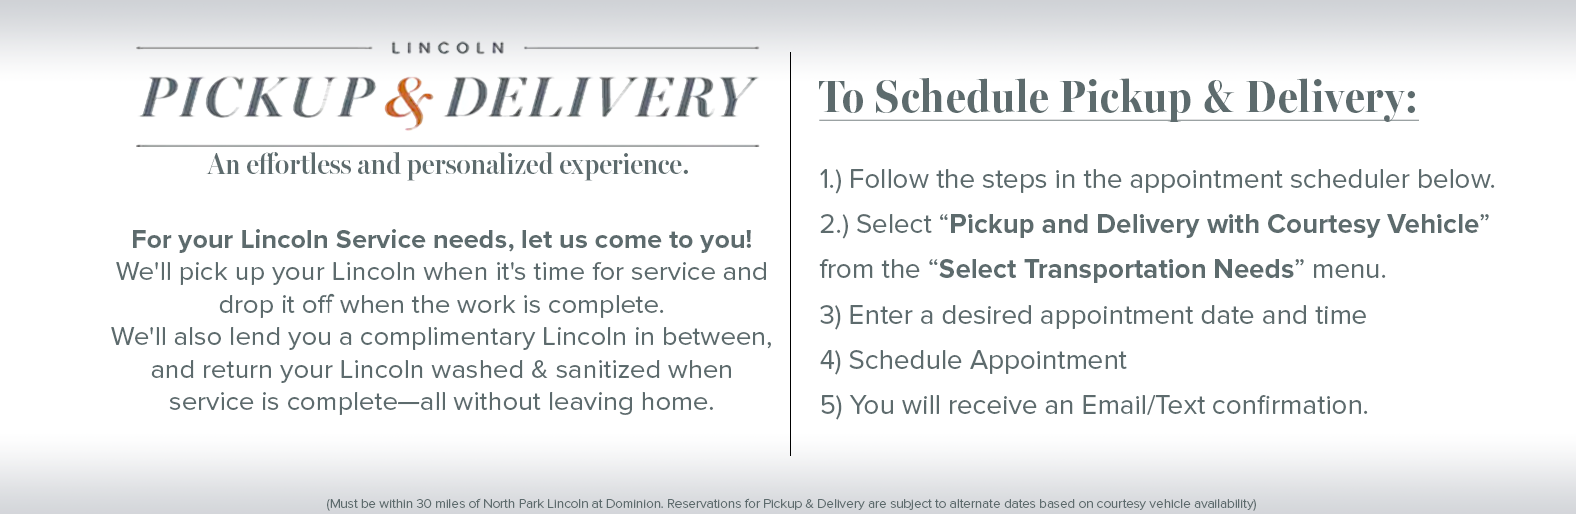 Lincoln Service Pickup & Delivery Scheduler